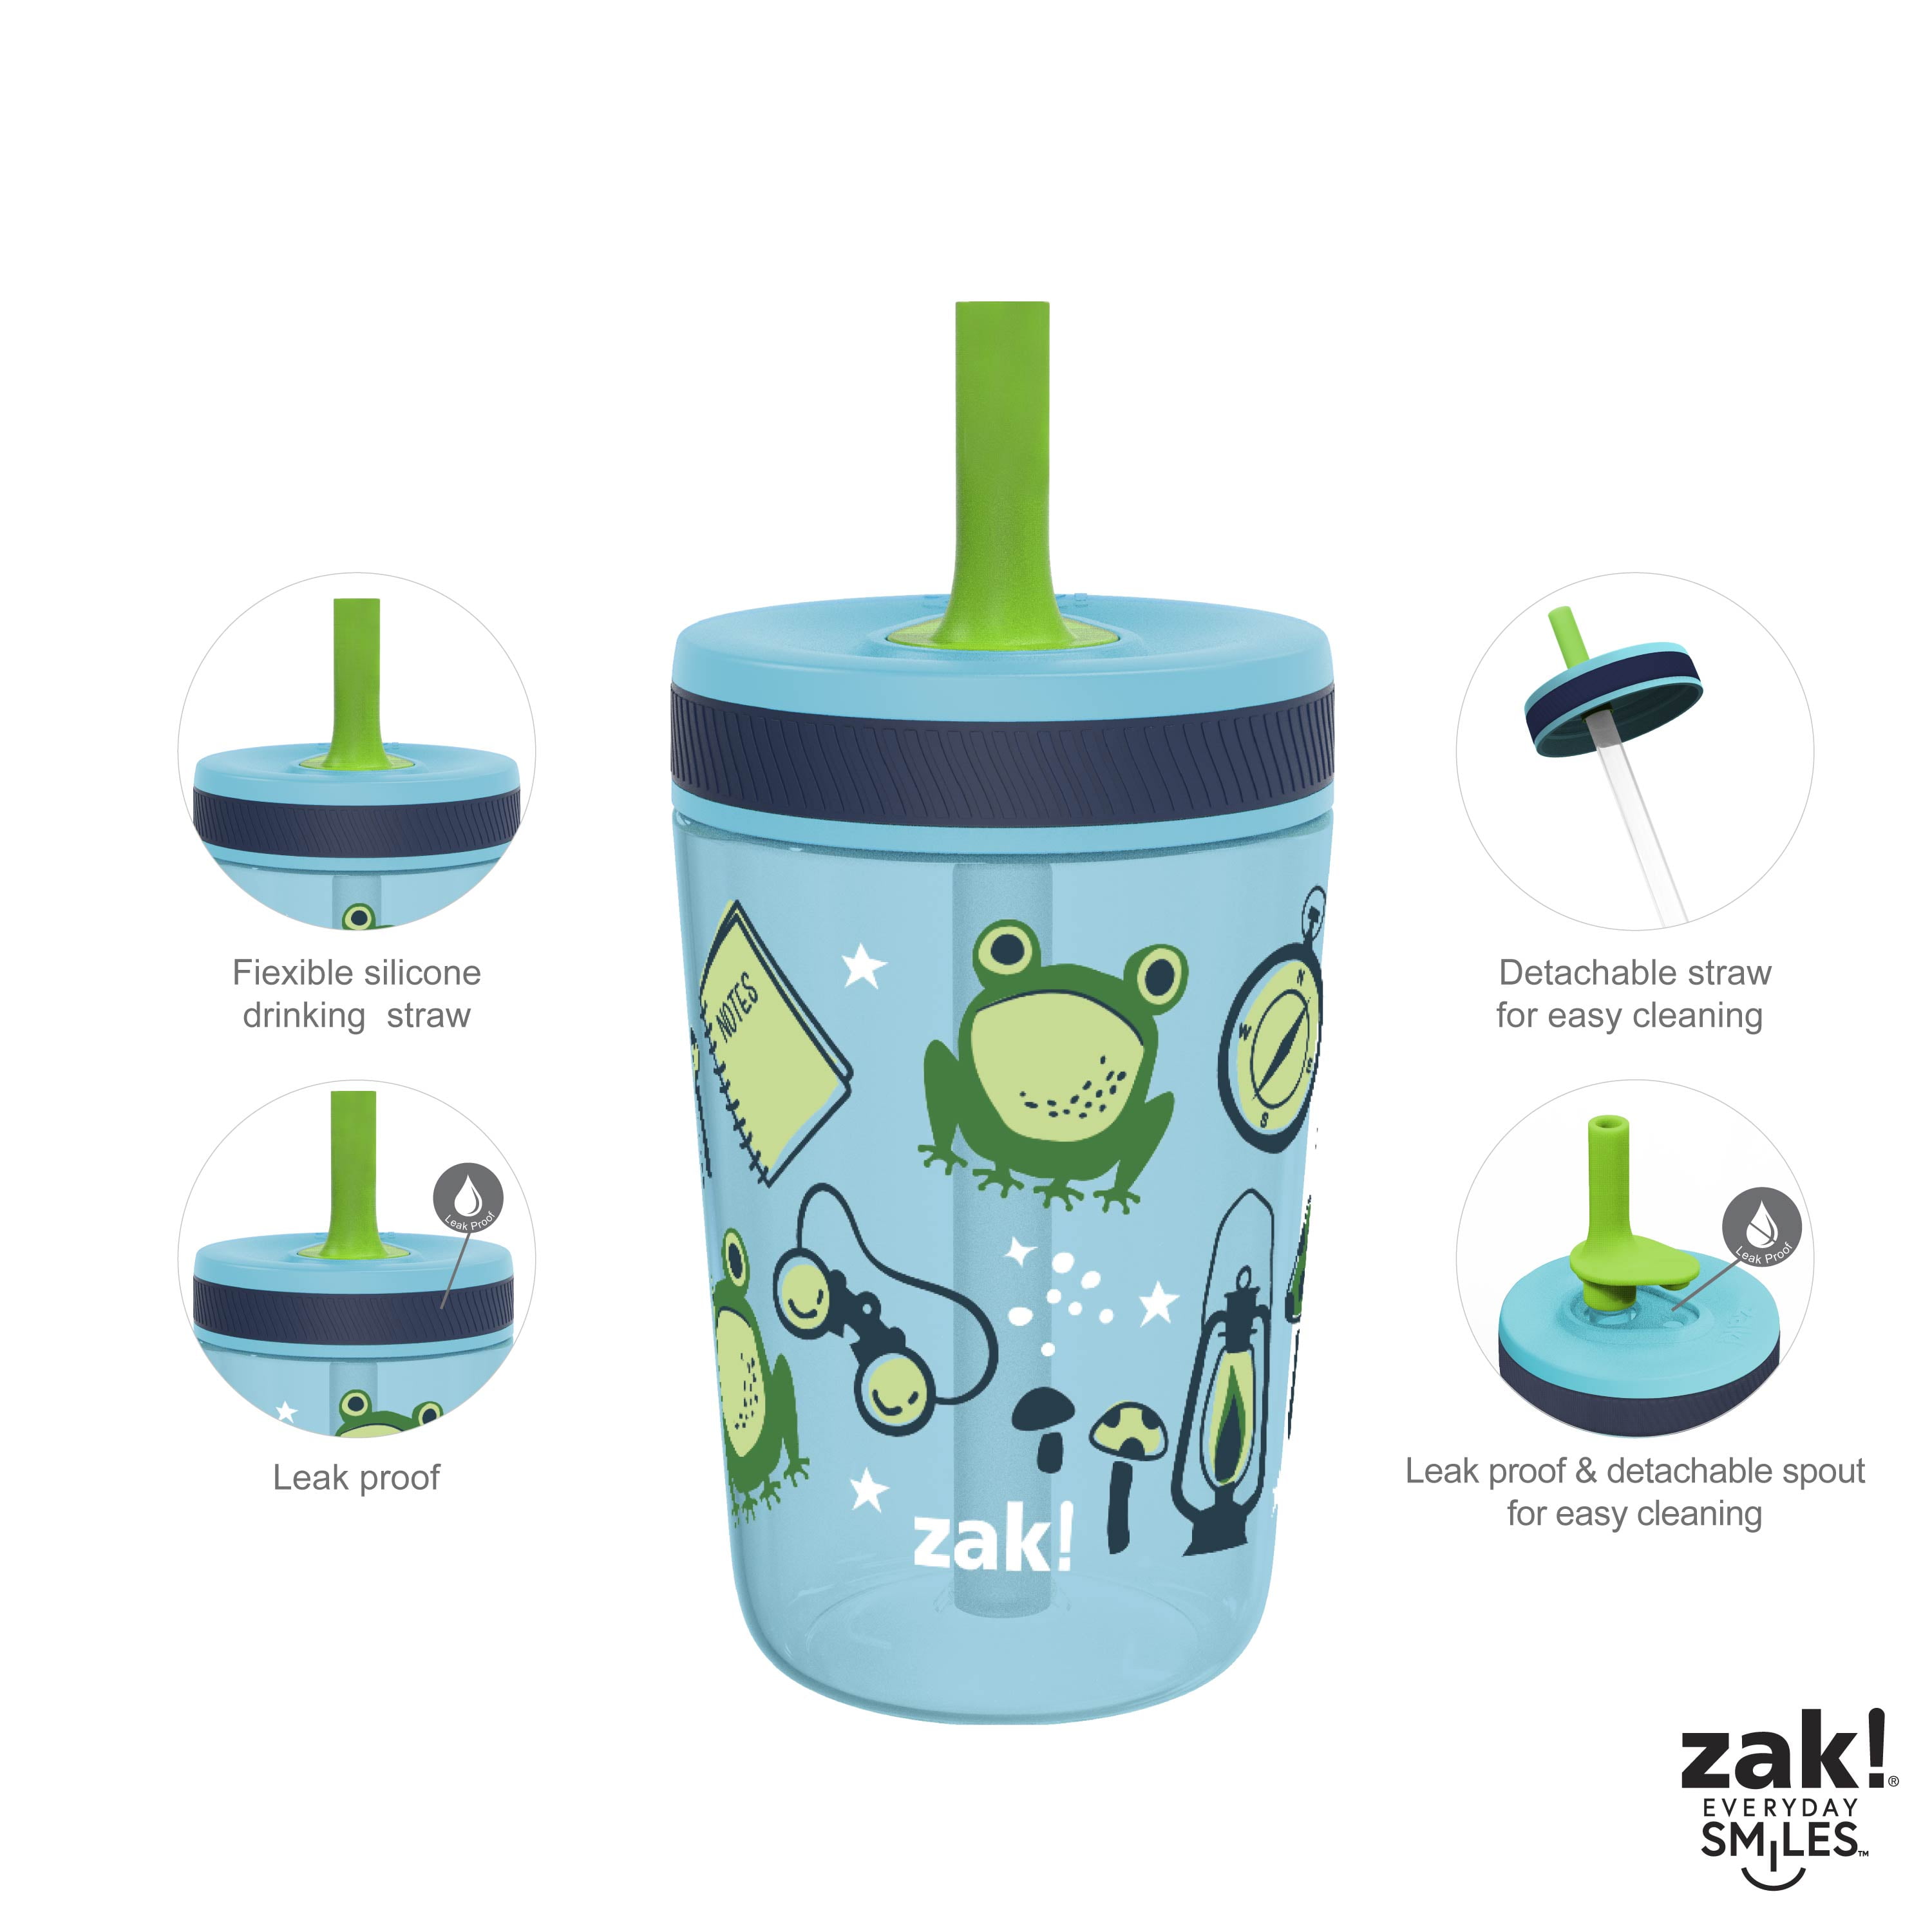 Vodolo Straw Replacement Compatible with Zak Straw Cups for Kids，4PCS 15 oz  Tumbler Water Bottle Reusable Silicone Straw BPA-Free with Straw Cleaning